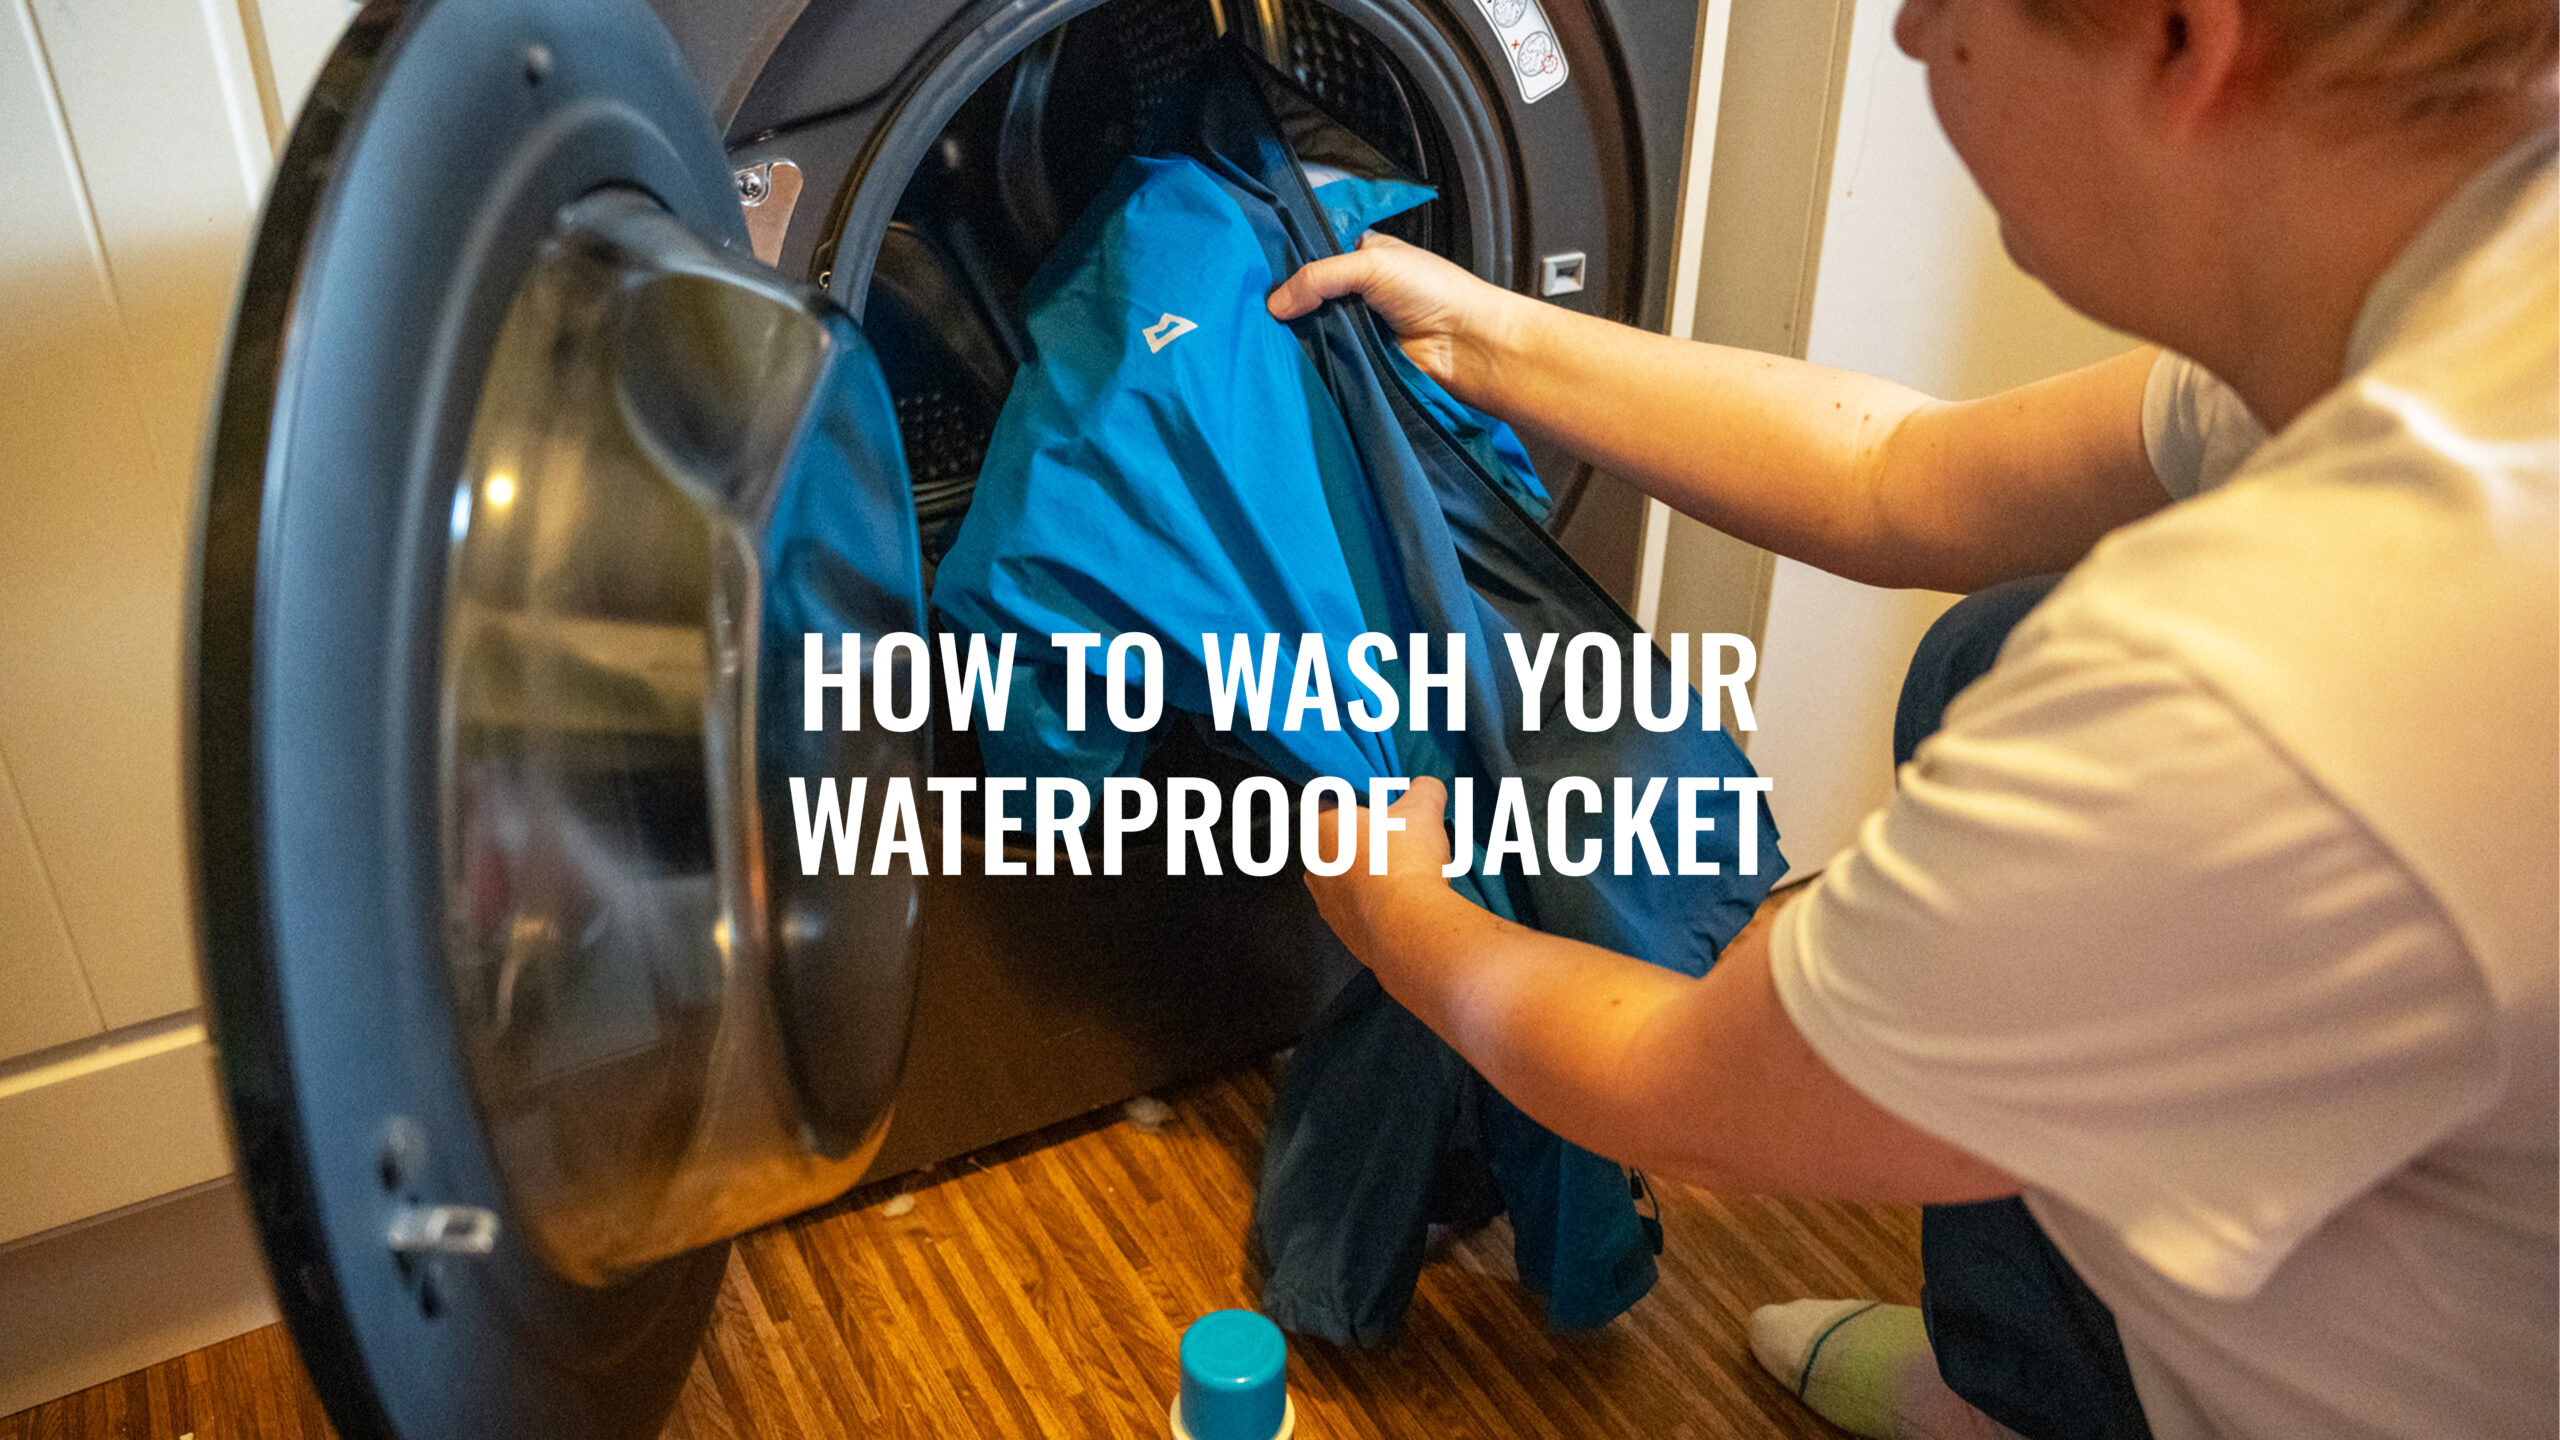 How To Wash Your Waterproof Jacket